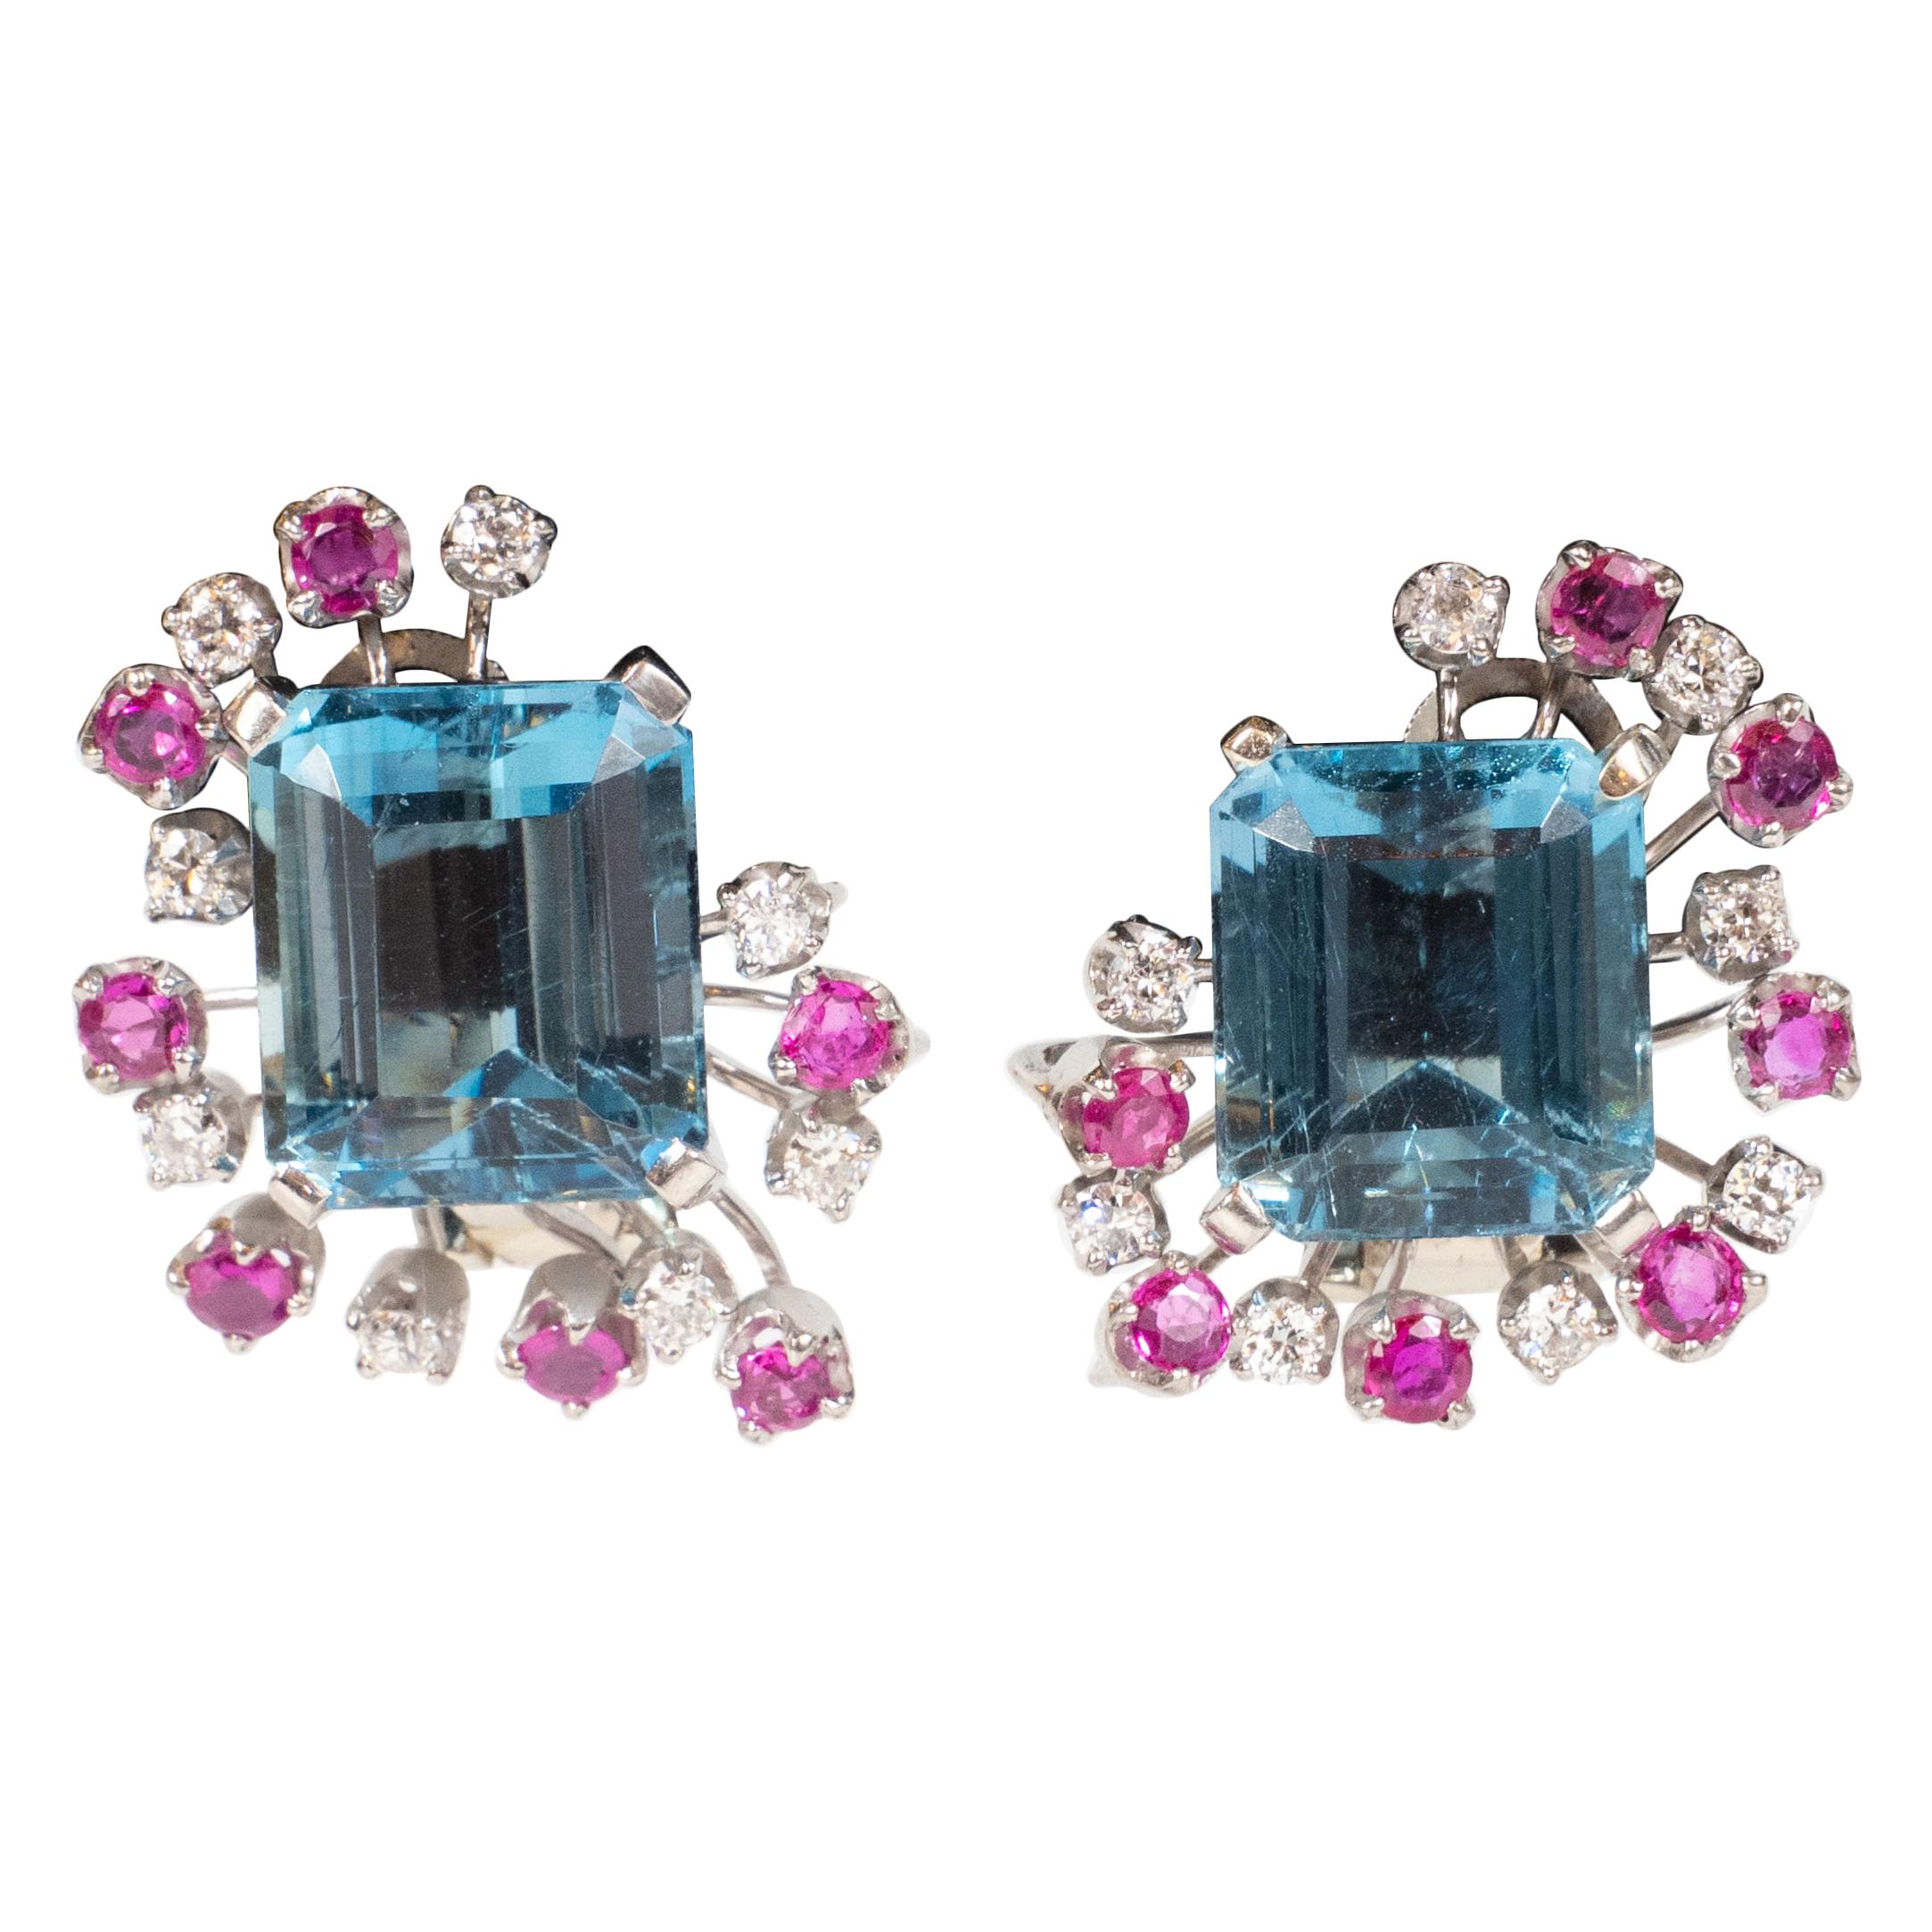 Retro 1940s 12 Carat Aquamarine and 14K White Gold Earrings with Diamonds &and Rubies